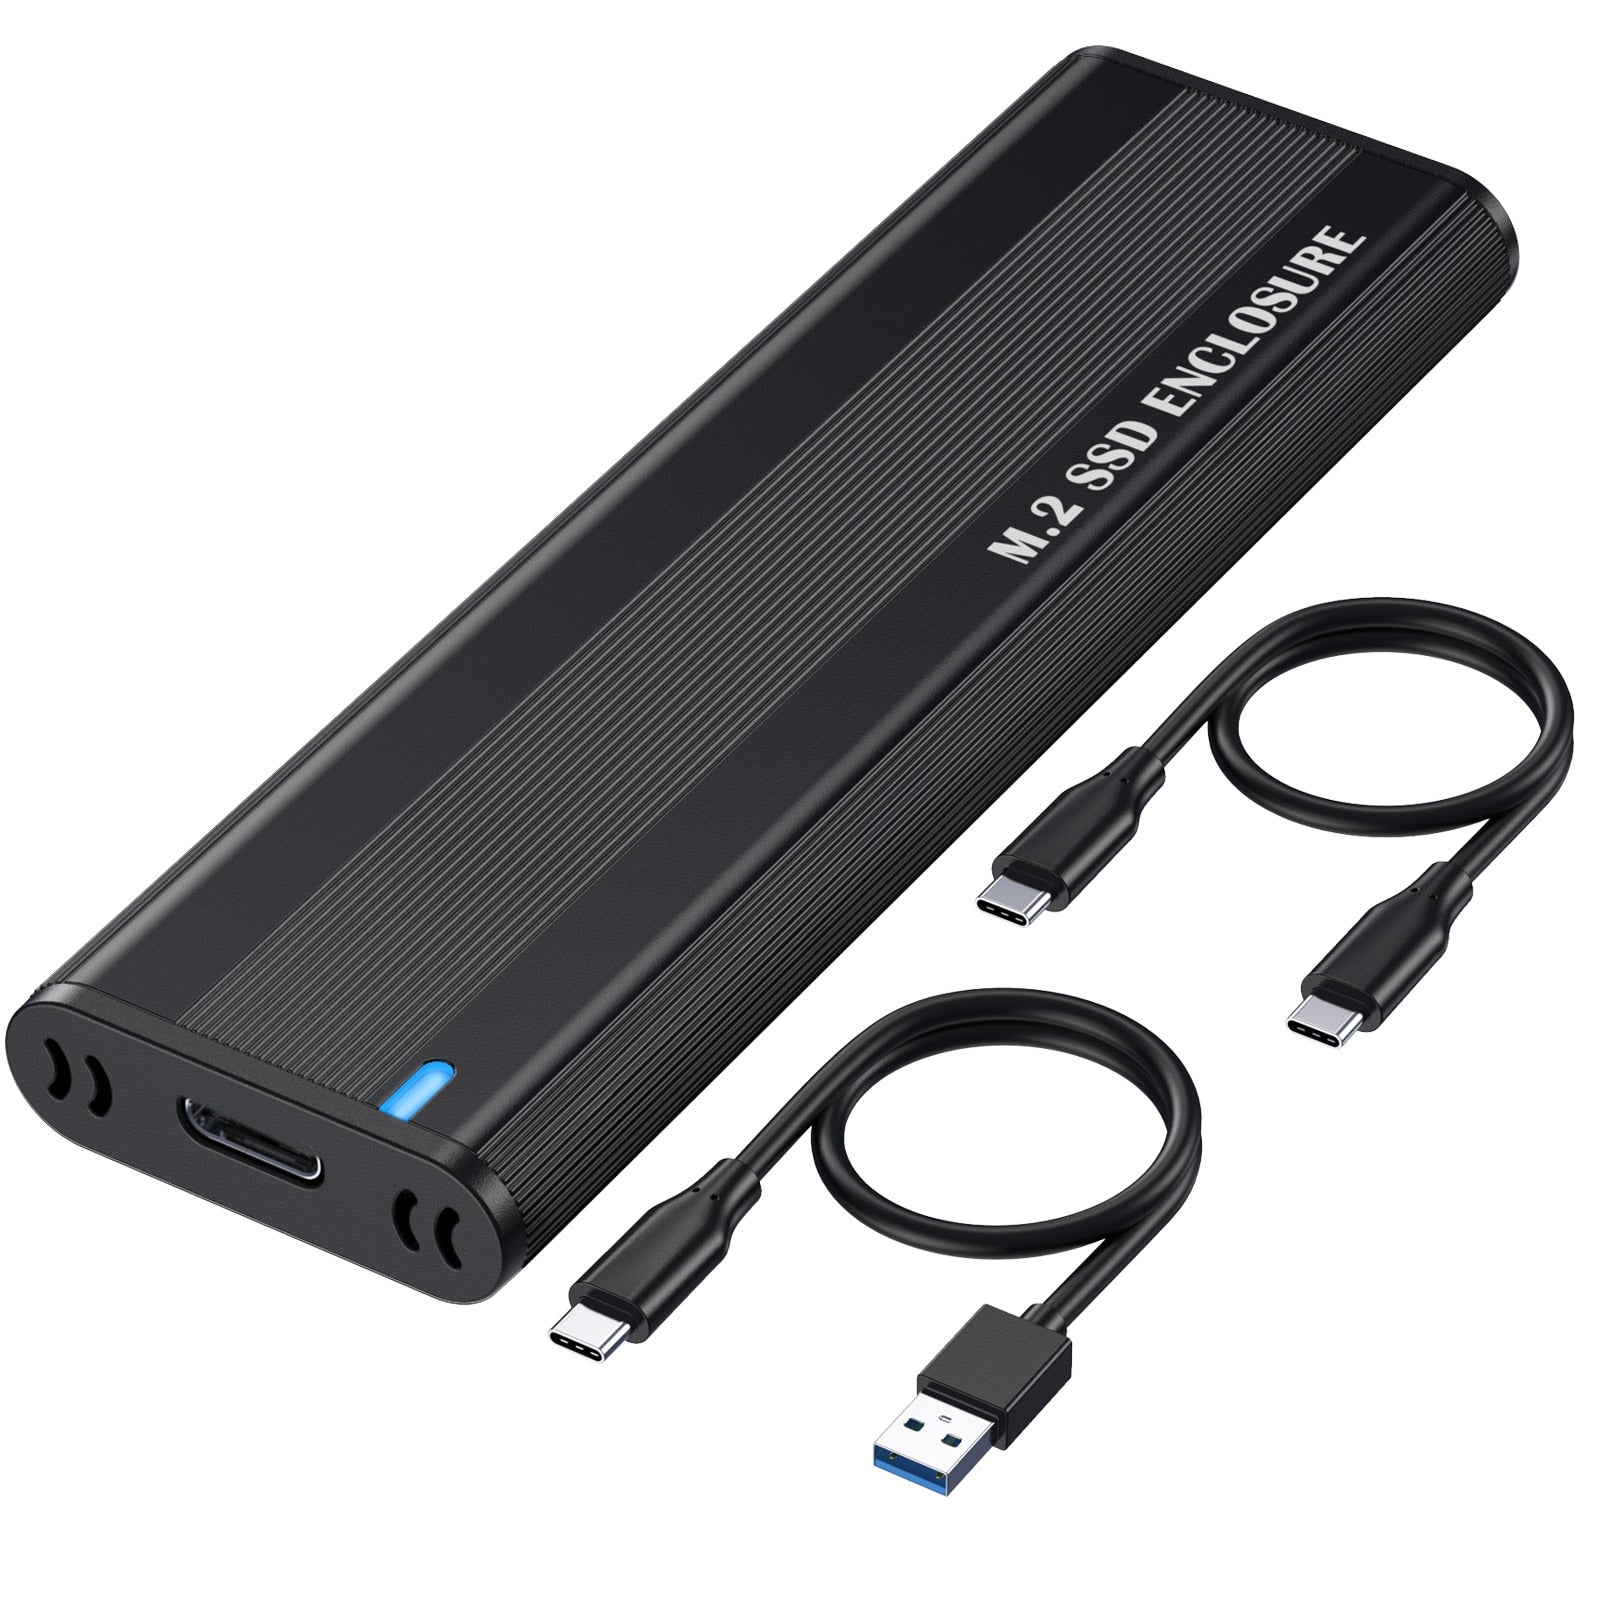 M2 SSD Case NVME SATA Dual Protocol M.2 to USB Type C 3.1 SSD Adapter for NVME PCIE NGFF SATA SSD Disk Box M.2 SSD Case